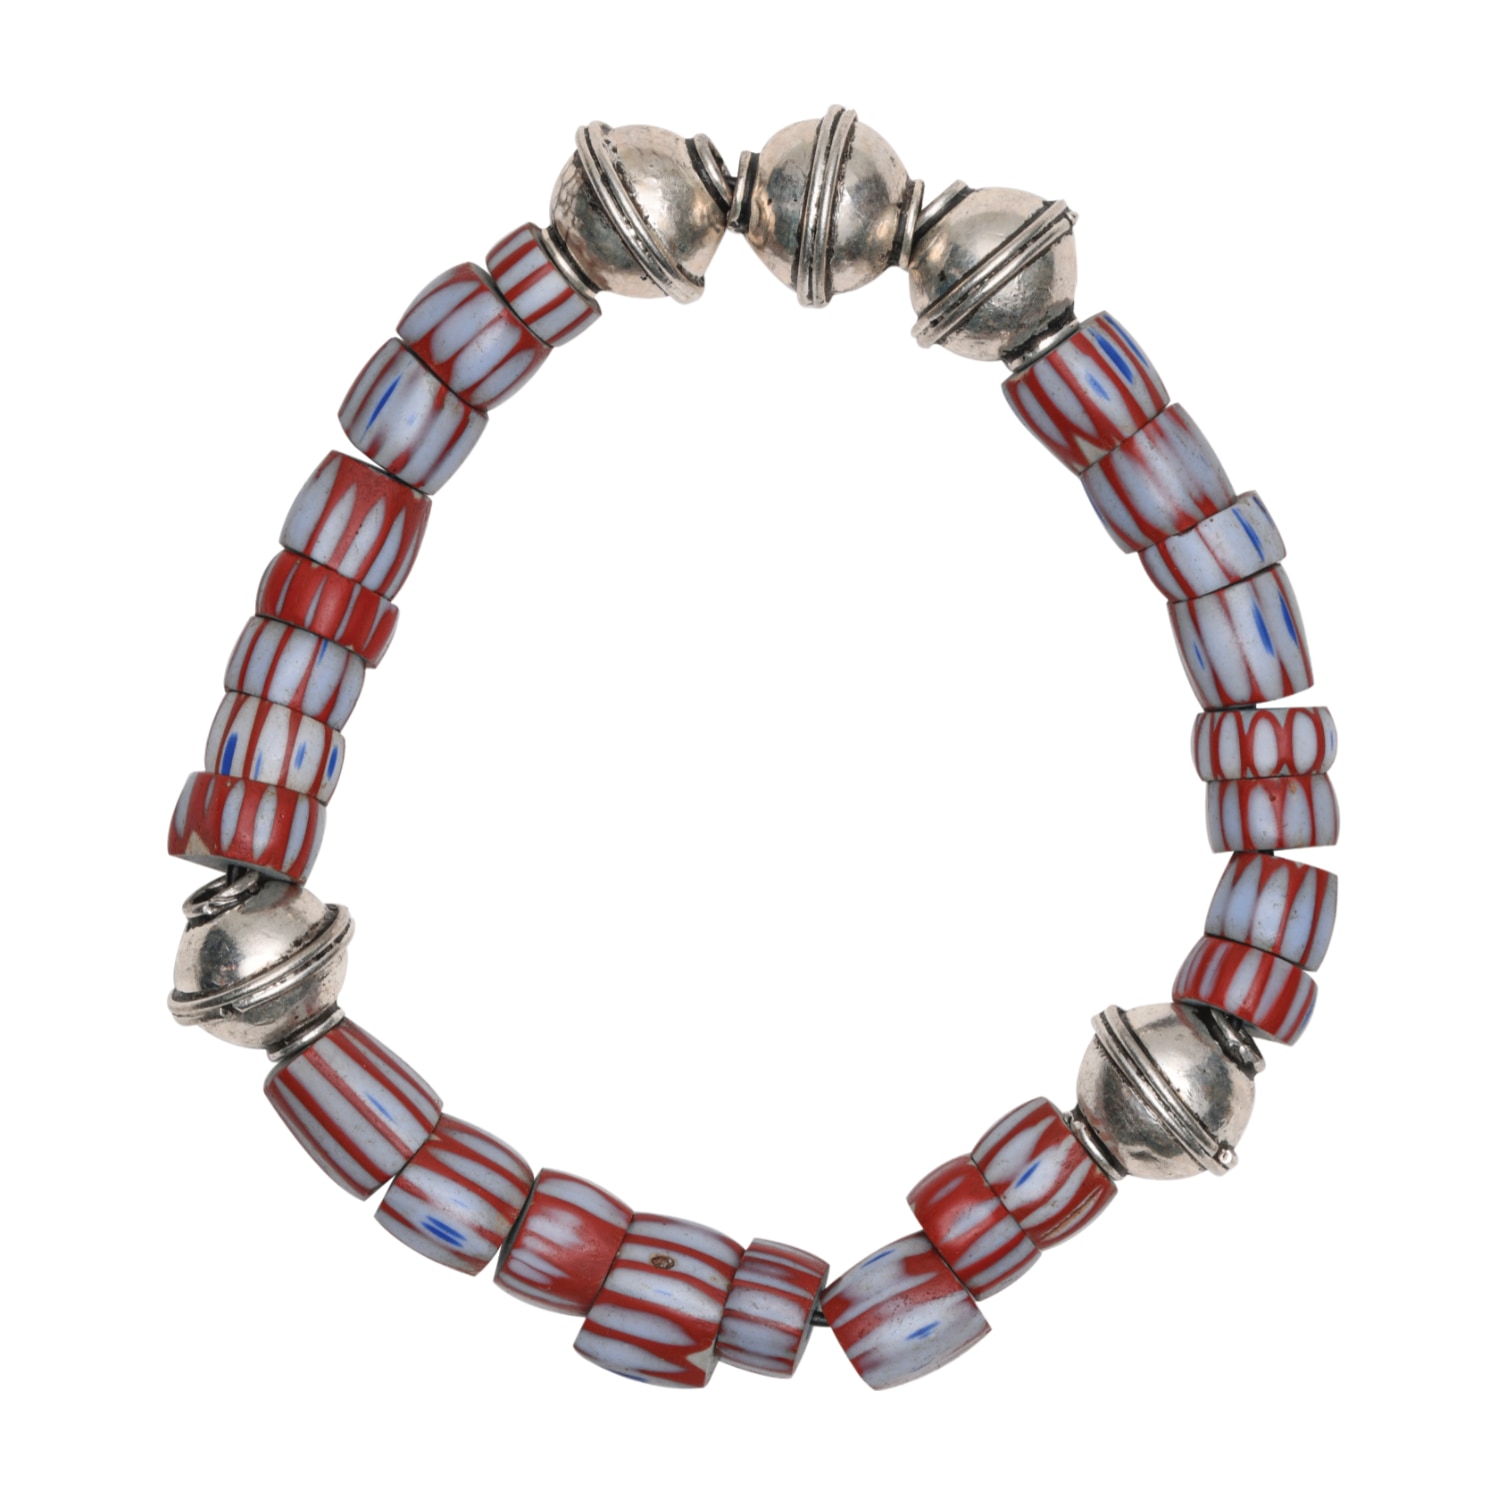 Women’s Awalleh Beads Bracelets With Silver Plated Spacers Binibeca Design